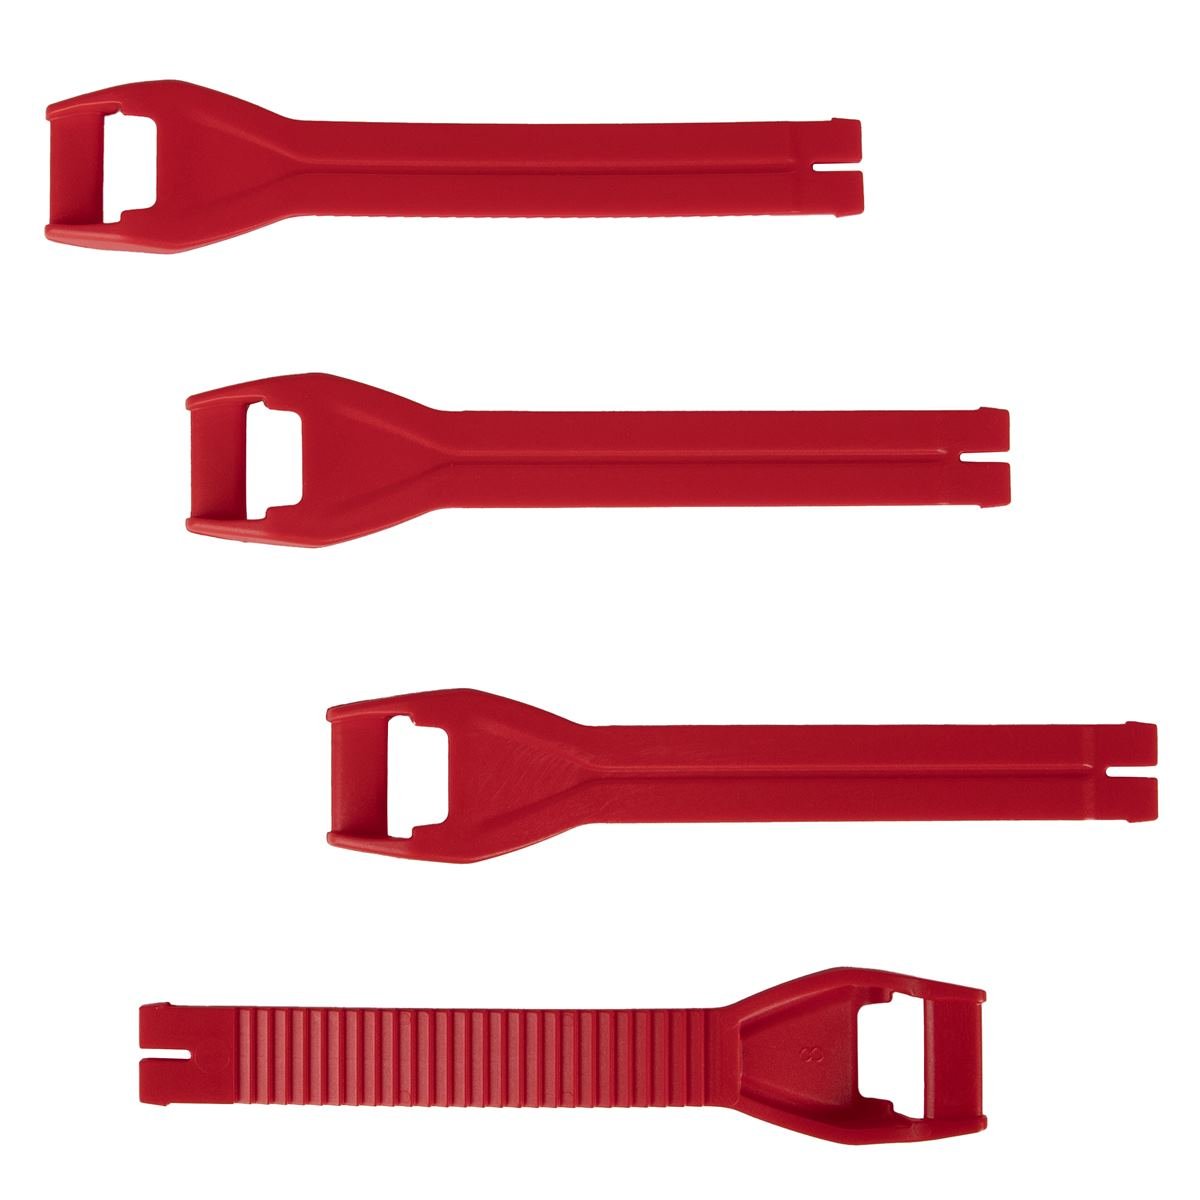 Gaerne Replacement Strap Kit SG 22 Set of 4 - Long, Red